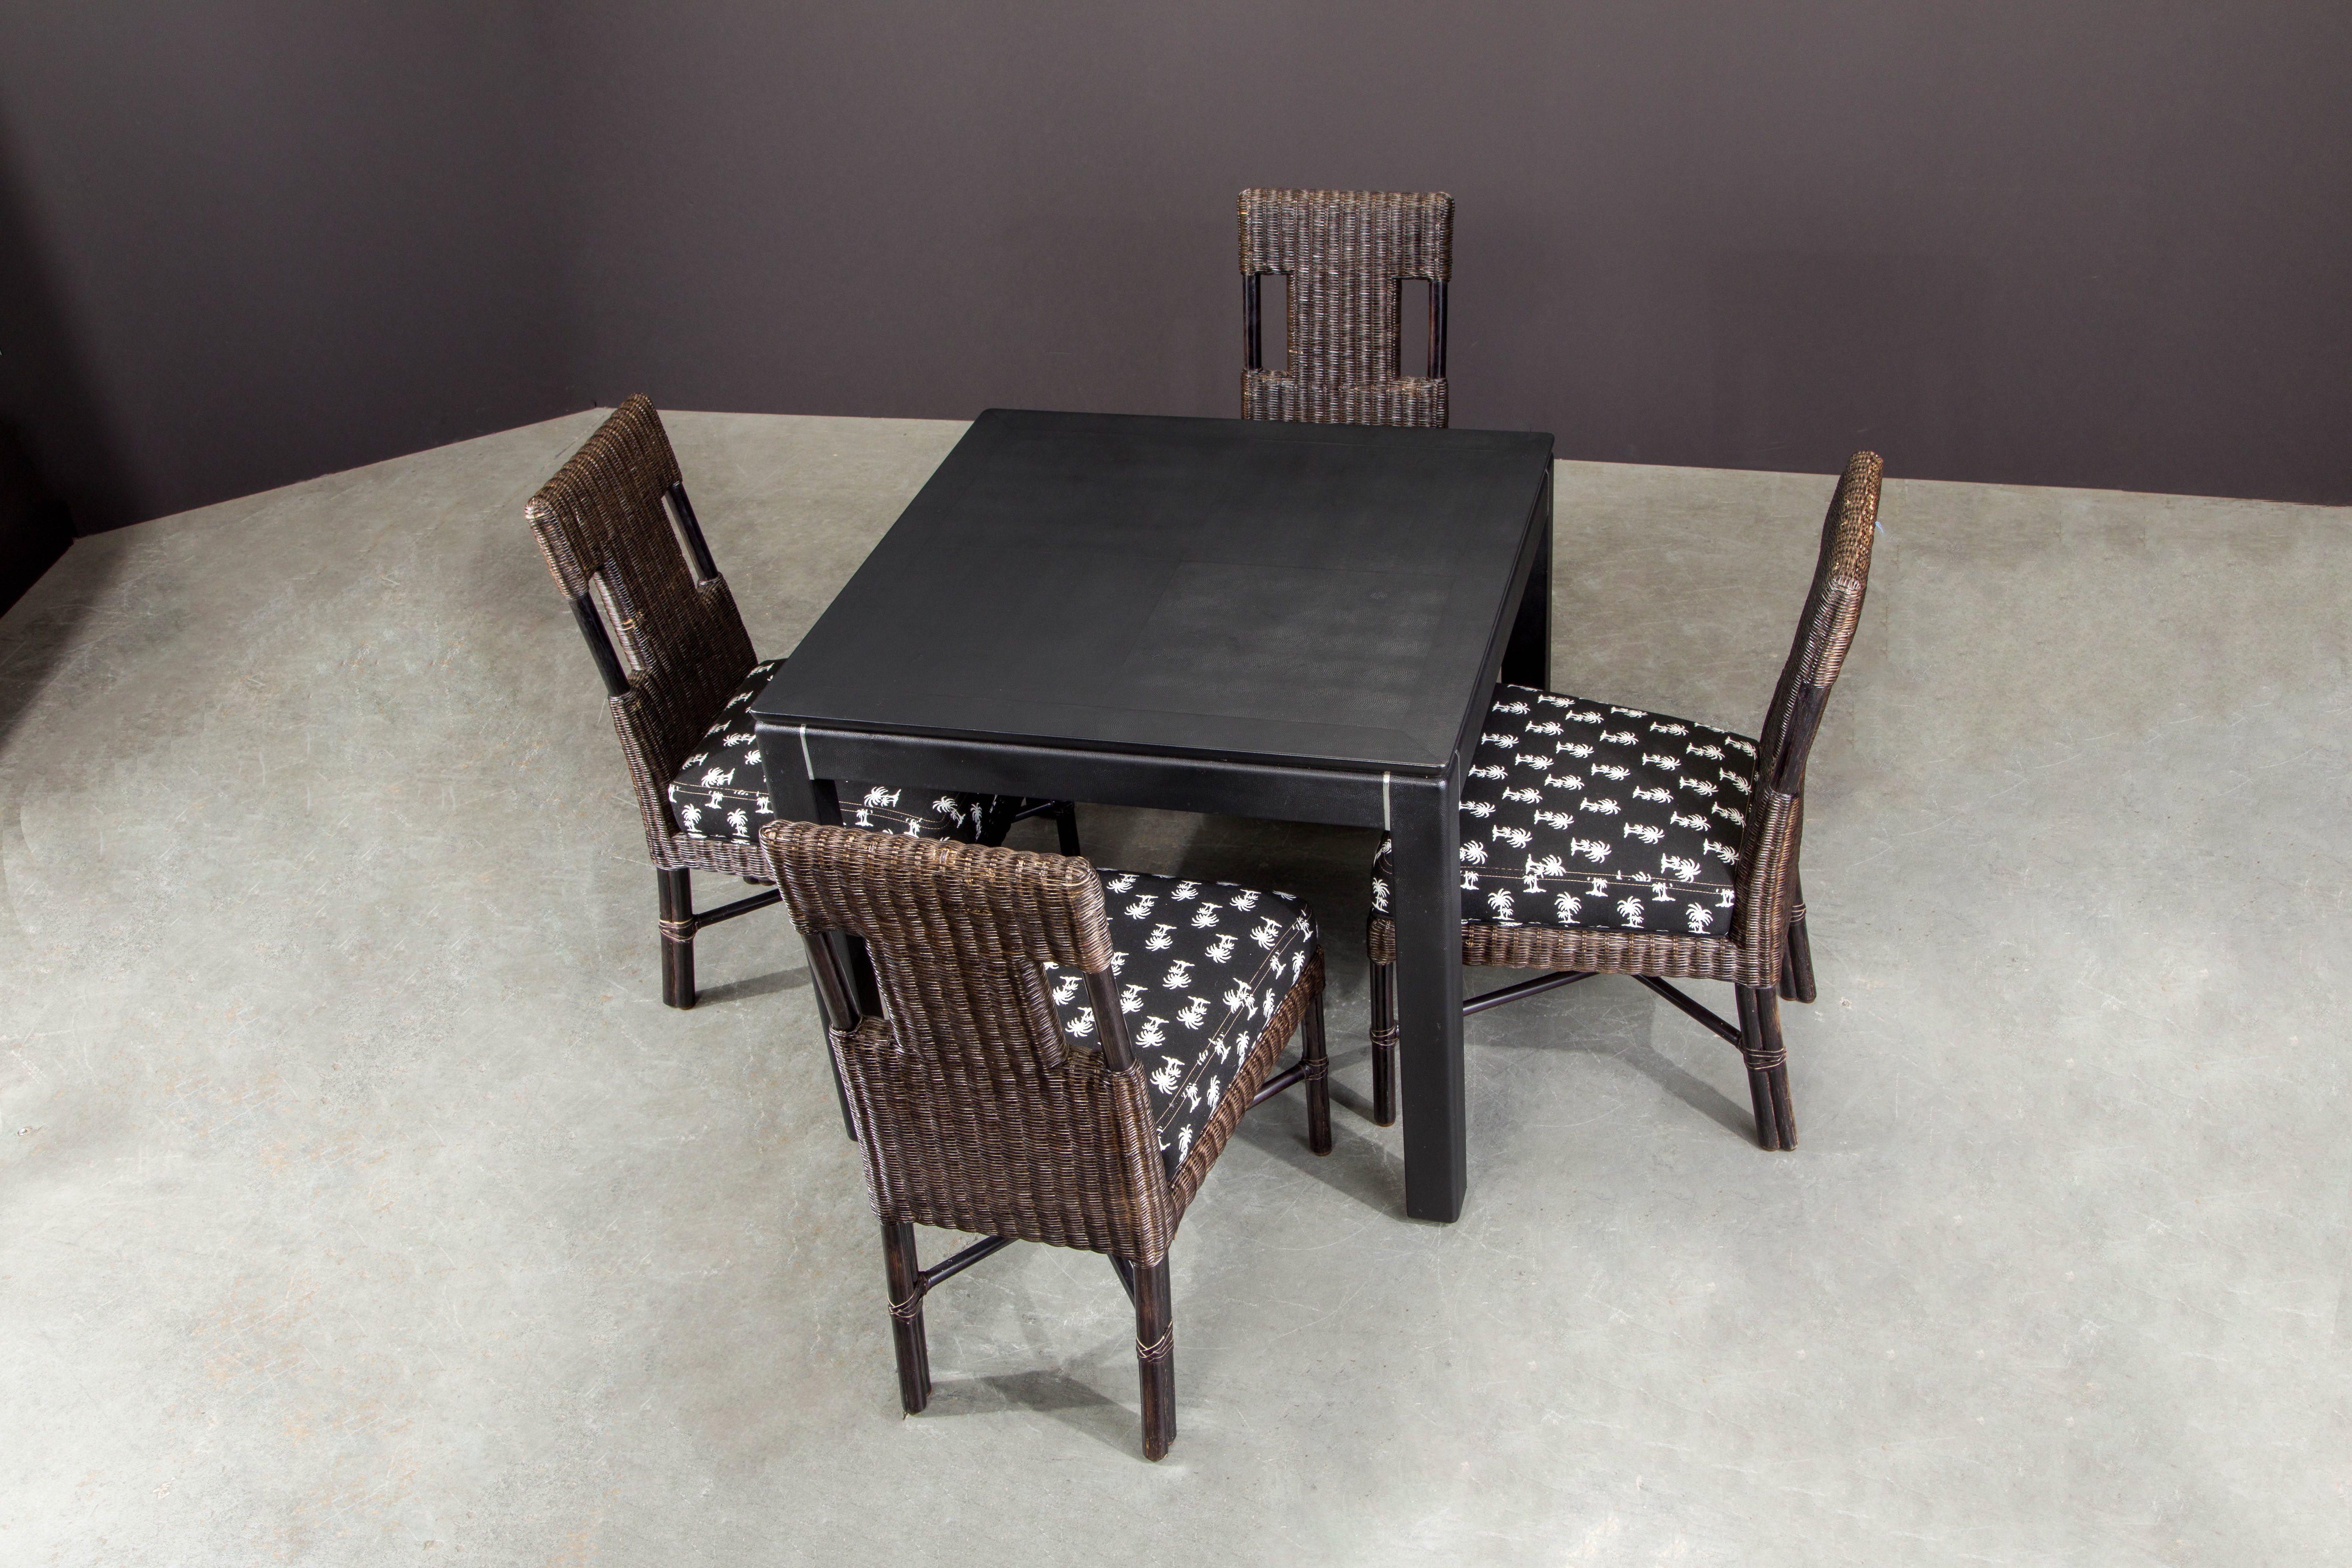 Karl Springer Embossed Leather Cafe / Game Table, 1983, Signed and Dated 13